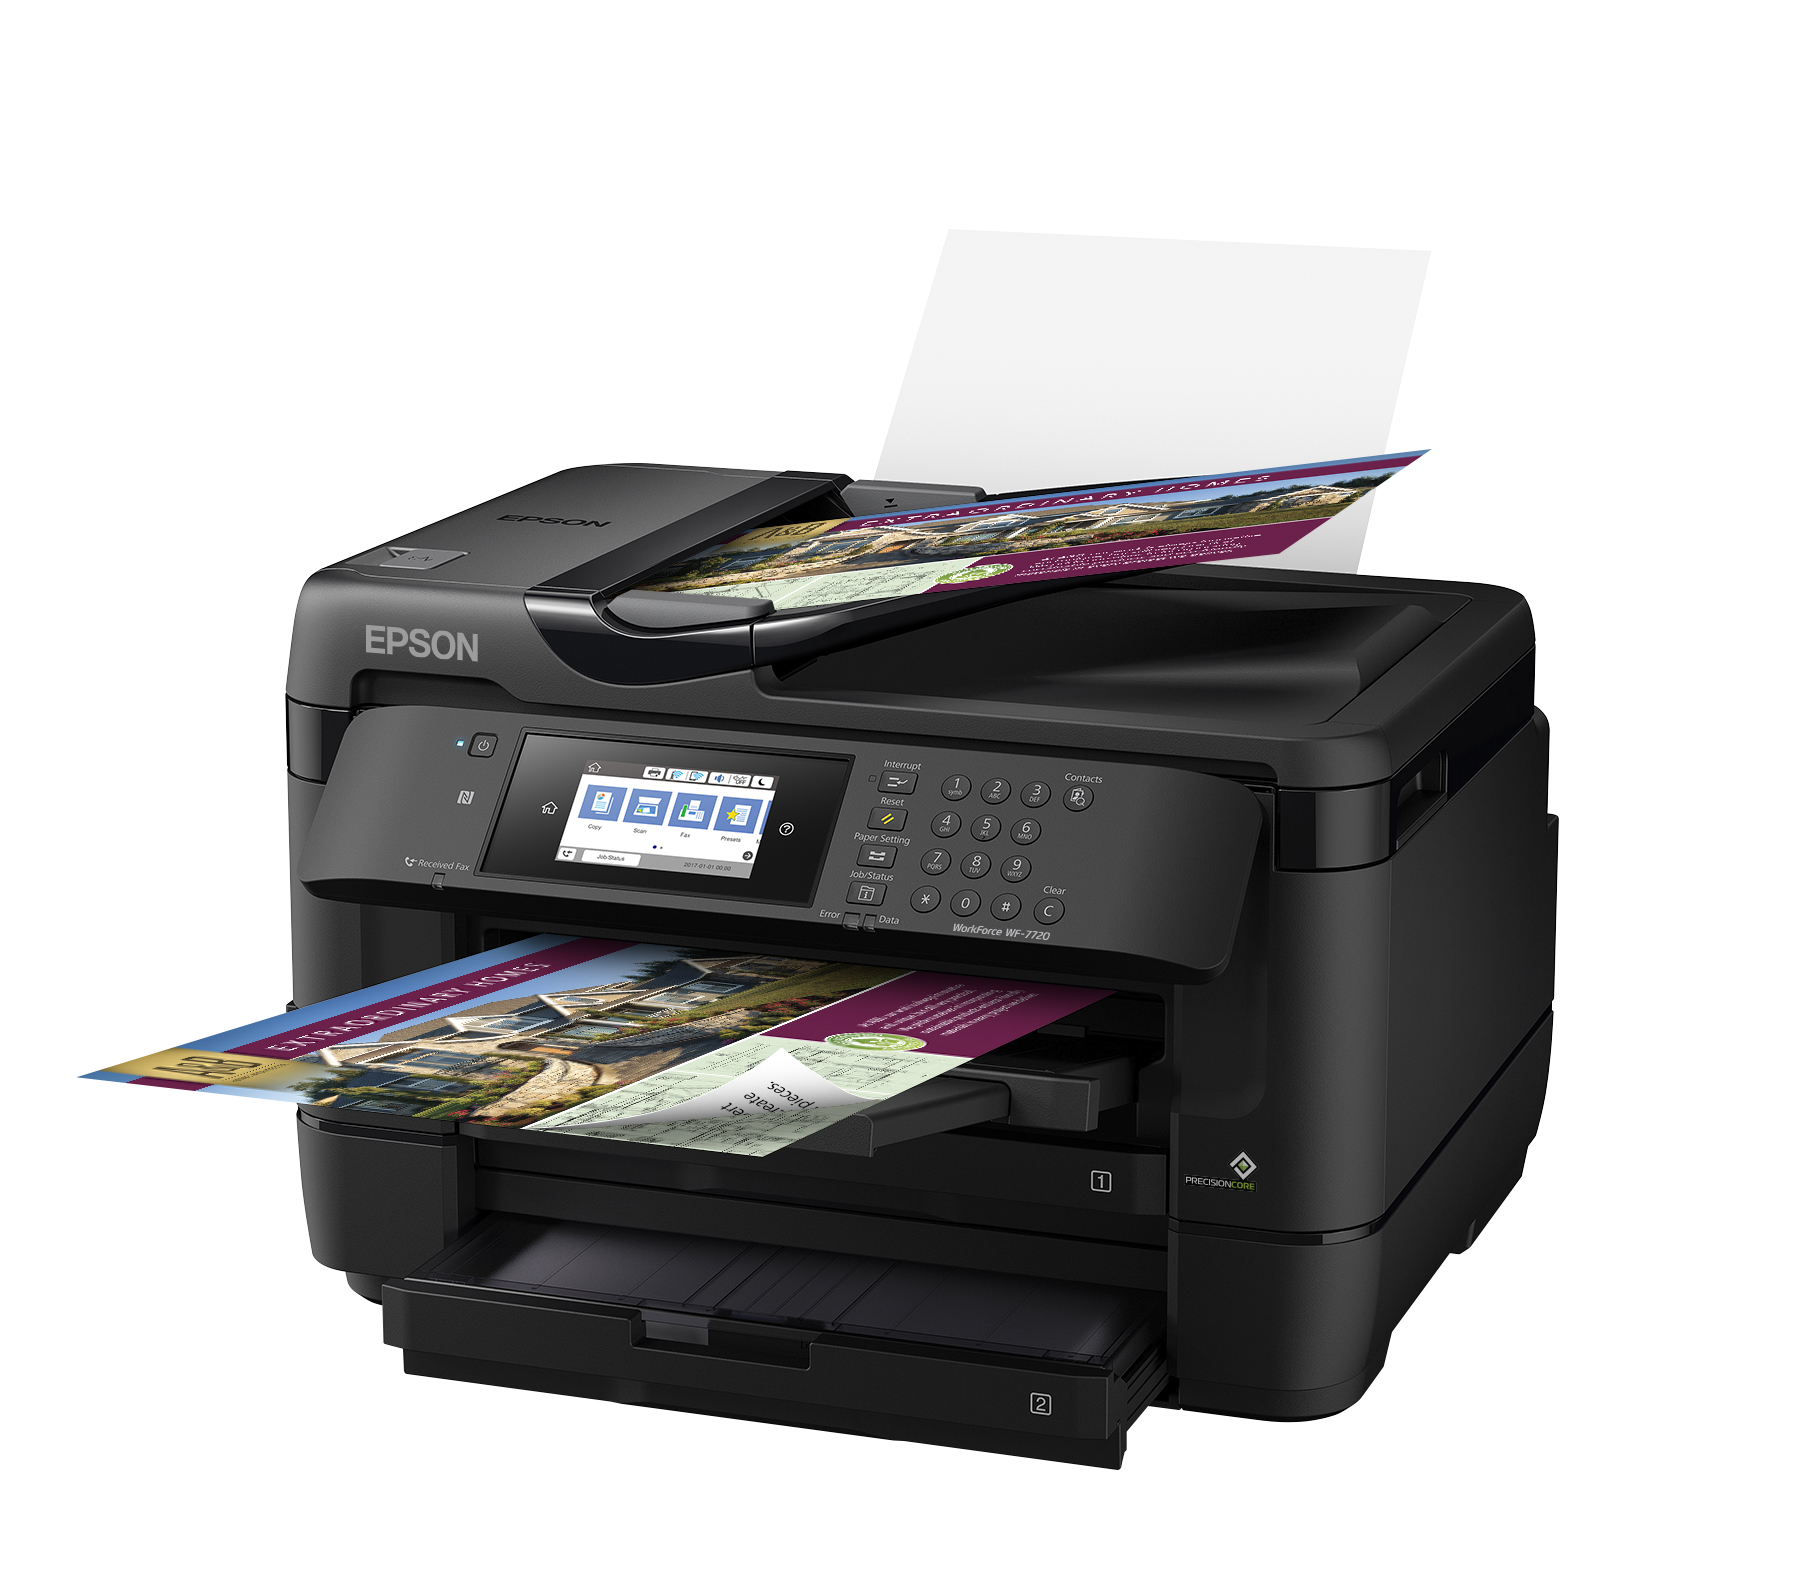 Epson WorkForce WF-7720 Wireless Wide-format Color Inkjet Printer with Copy, Scan, Fax, Wi-Fi Direct and Ethernet - image 3 of 5